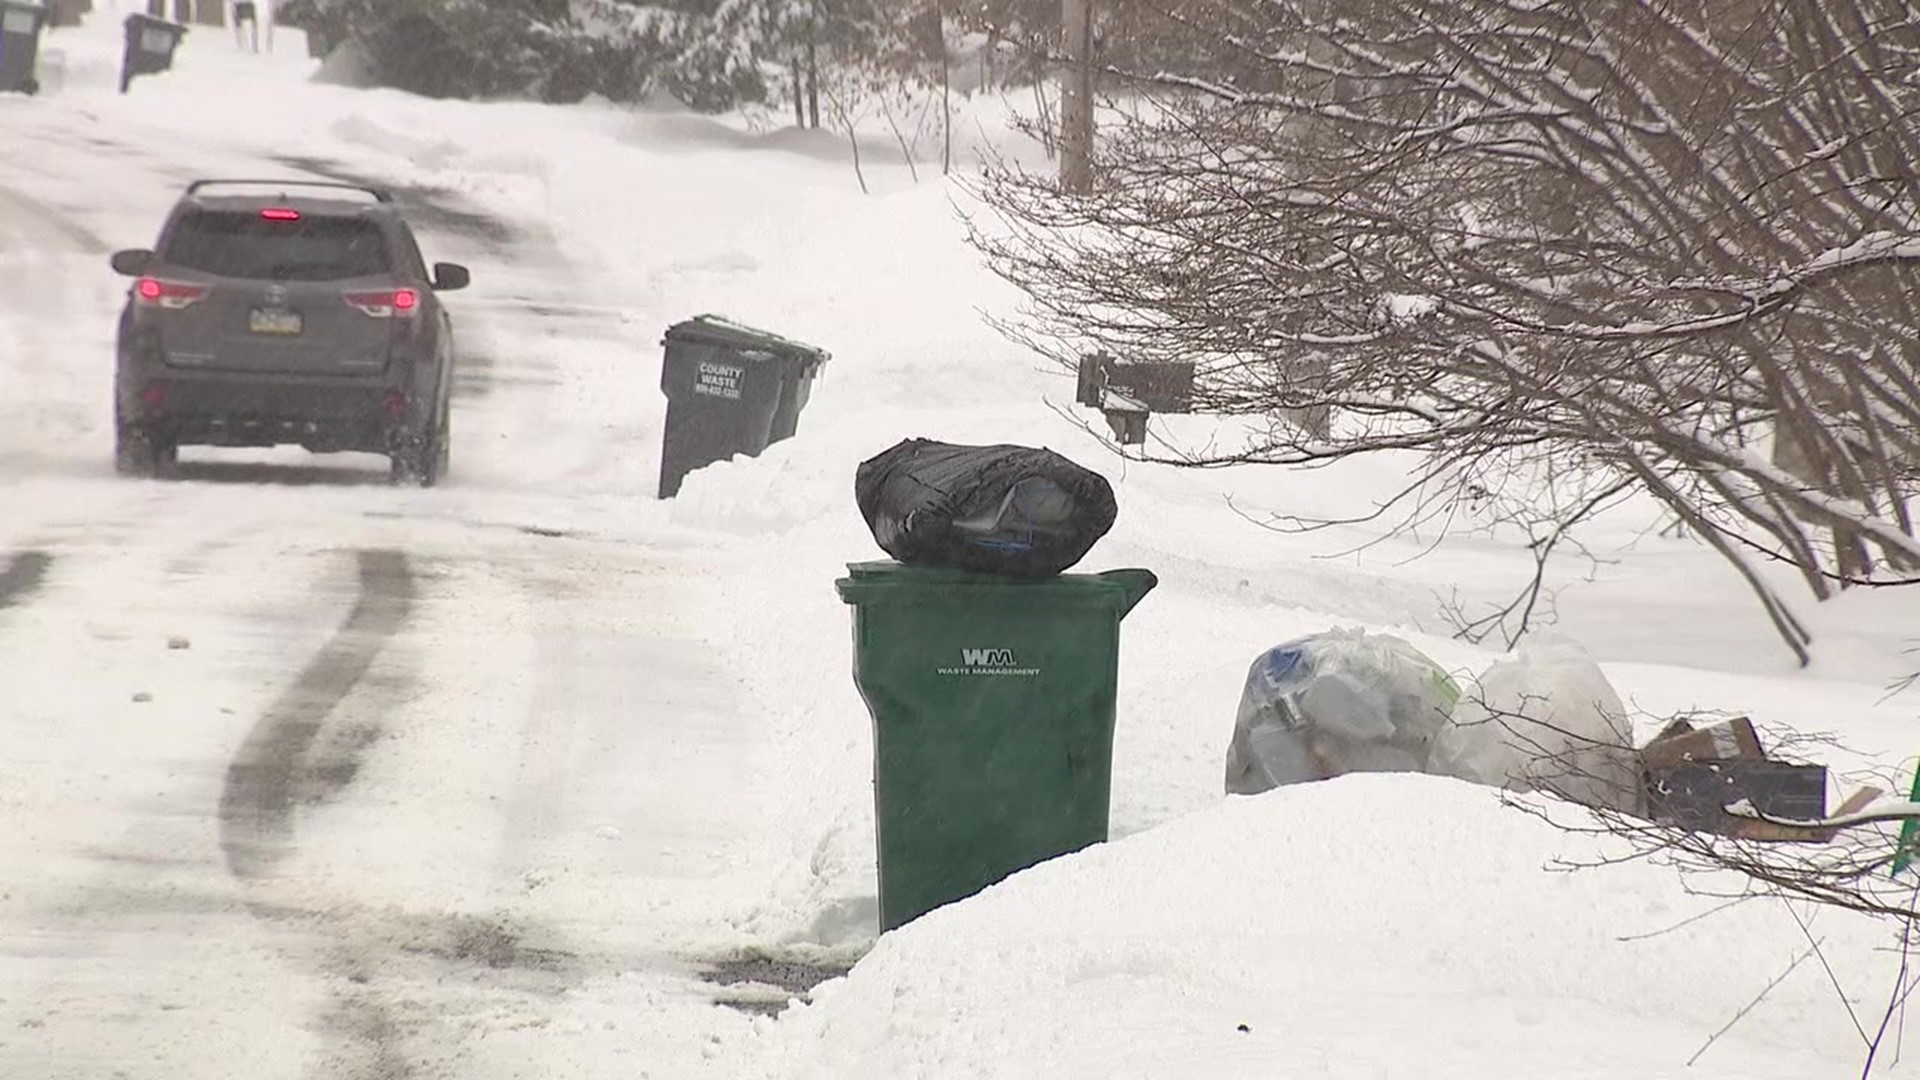 If you have a complaint about your trash not being picked up, after you report it to your waste hauler, township officials in one part of the Poconos want to know.